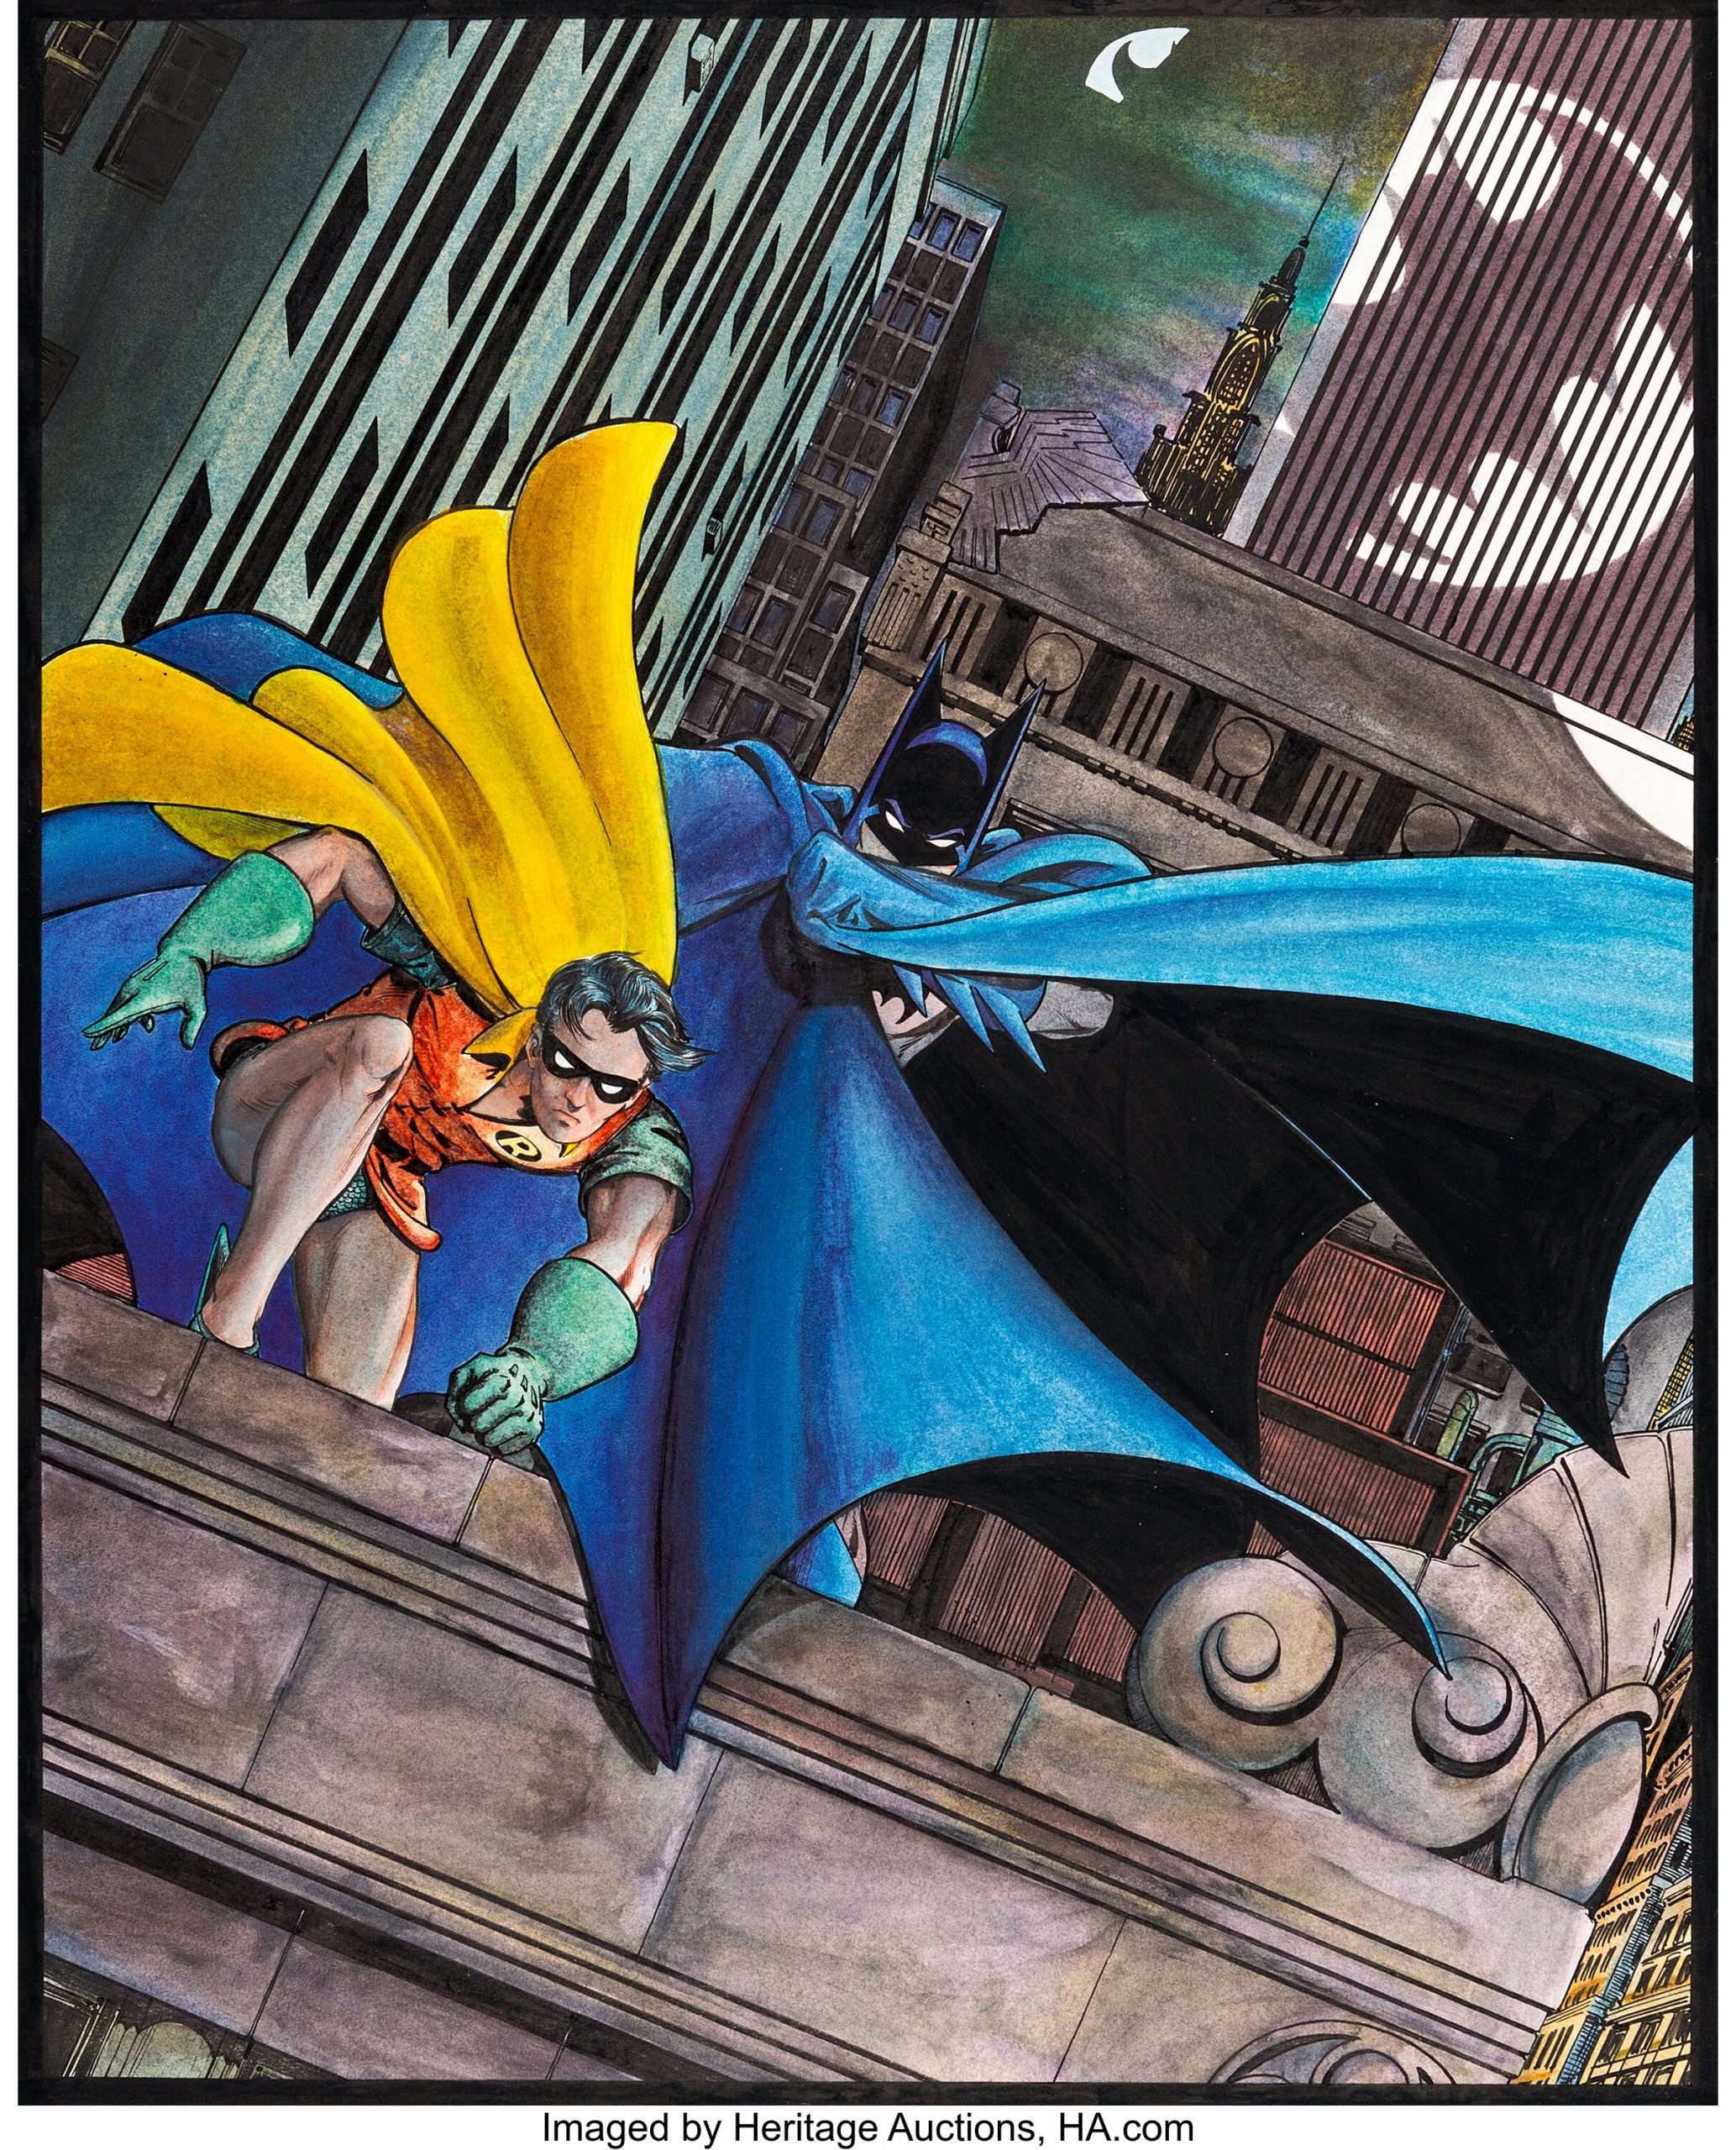 MARSHALL ROGERS' Classic BATMAN AND ROBIN Painting Up for Auction | 13th  Dimension, Comics, Creators, Culture